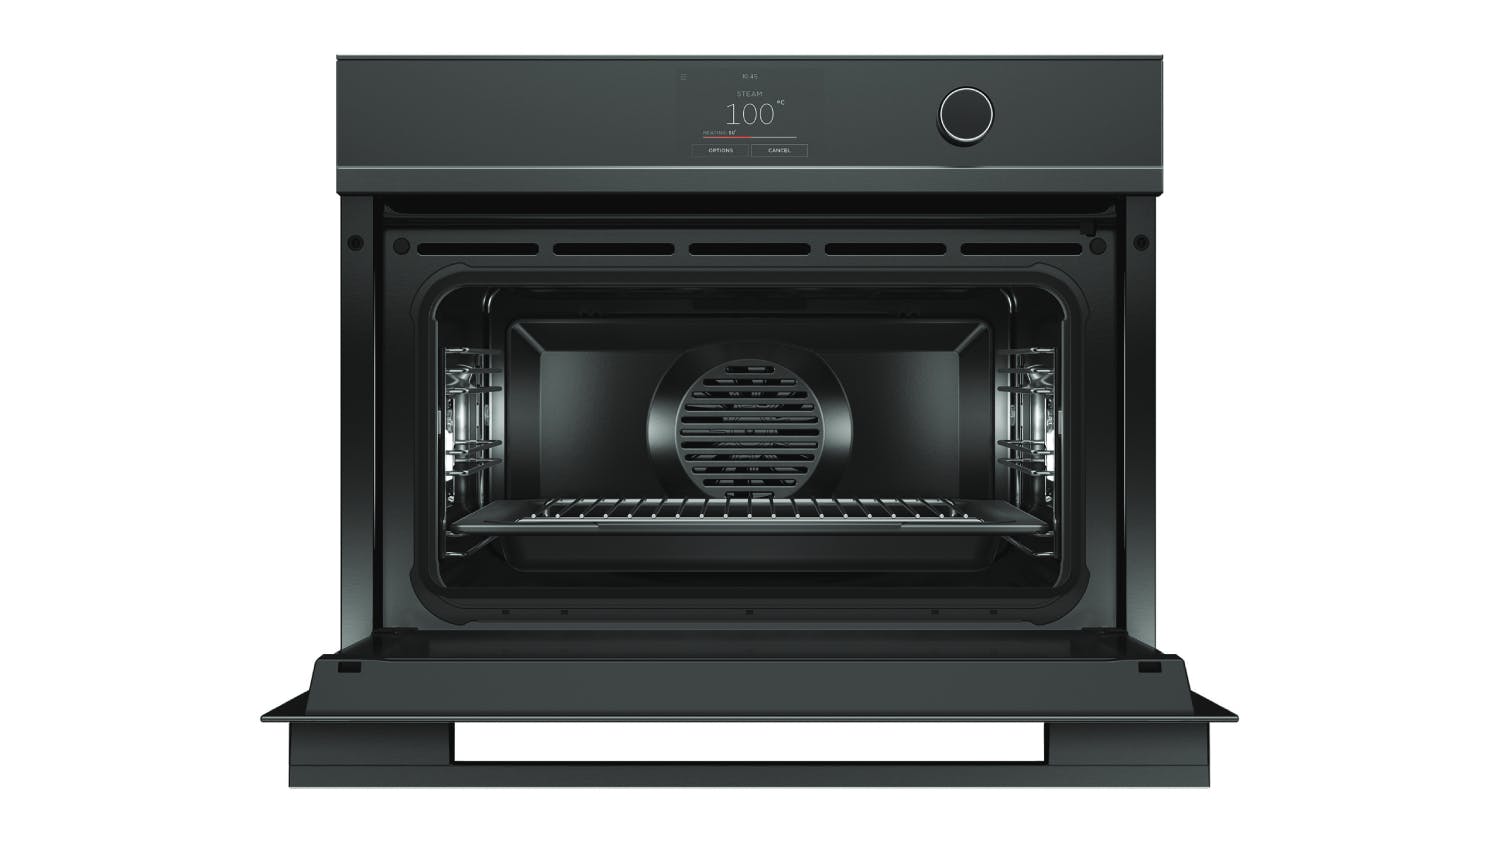 Fisher & Paykel 60cm Steam Clean 23 Function Built-In Compact Oven - Black Glass (Series 9/OS60NDTDB1)